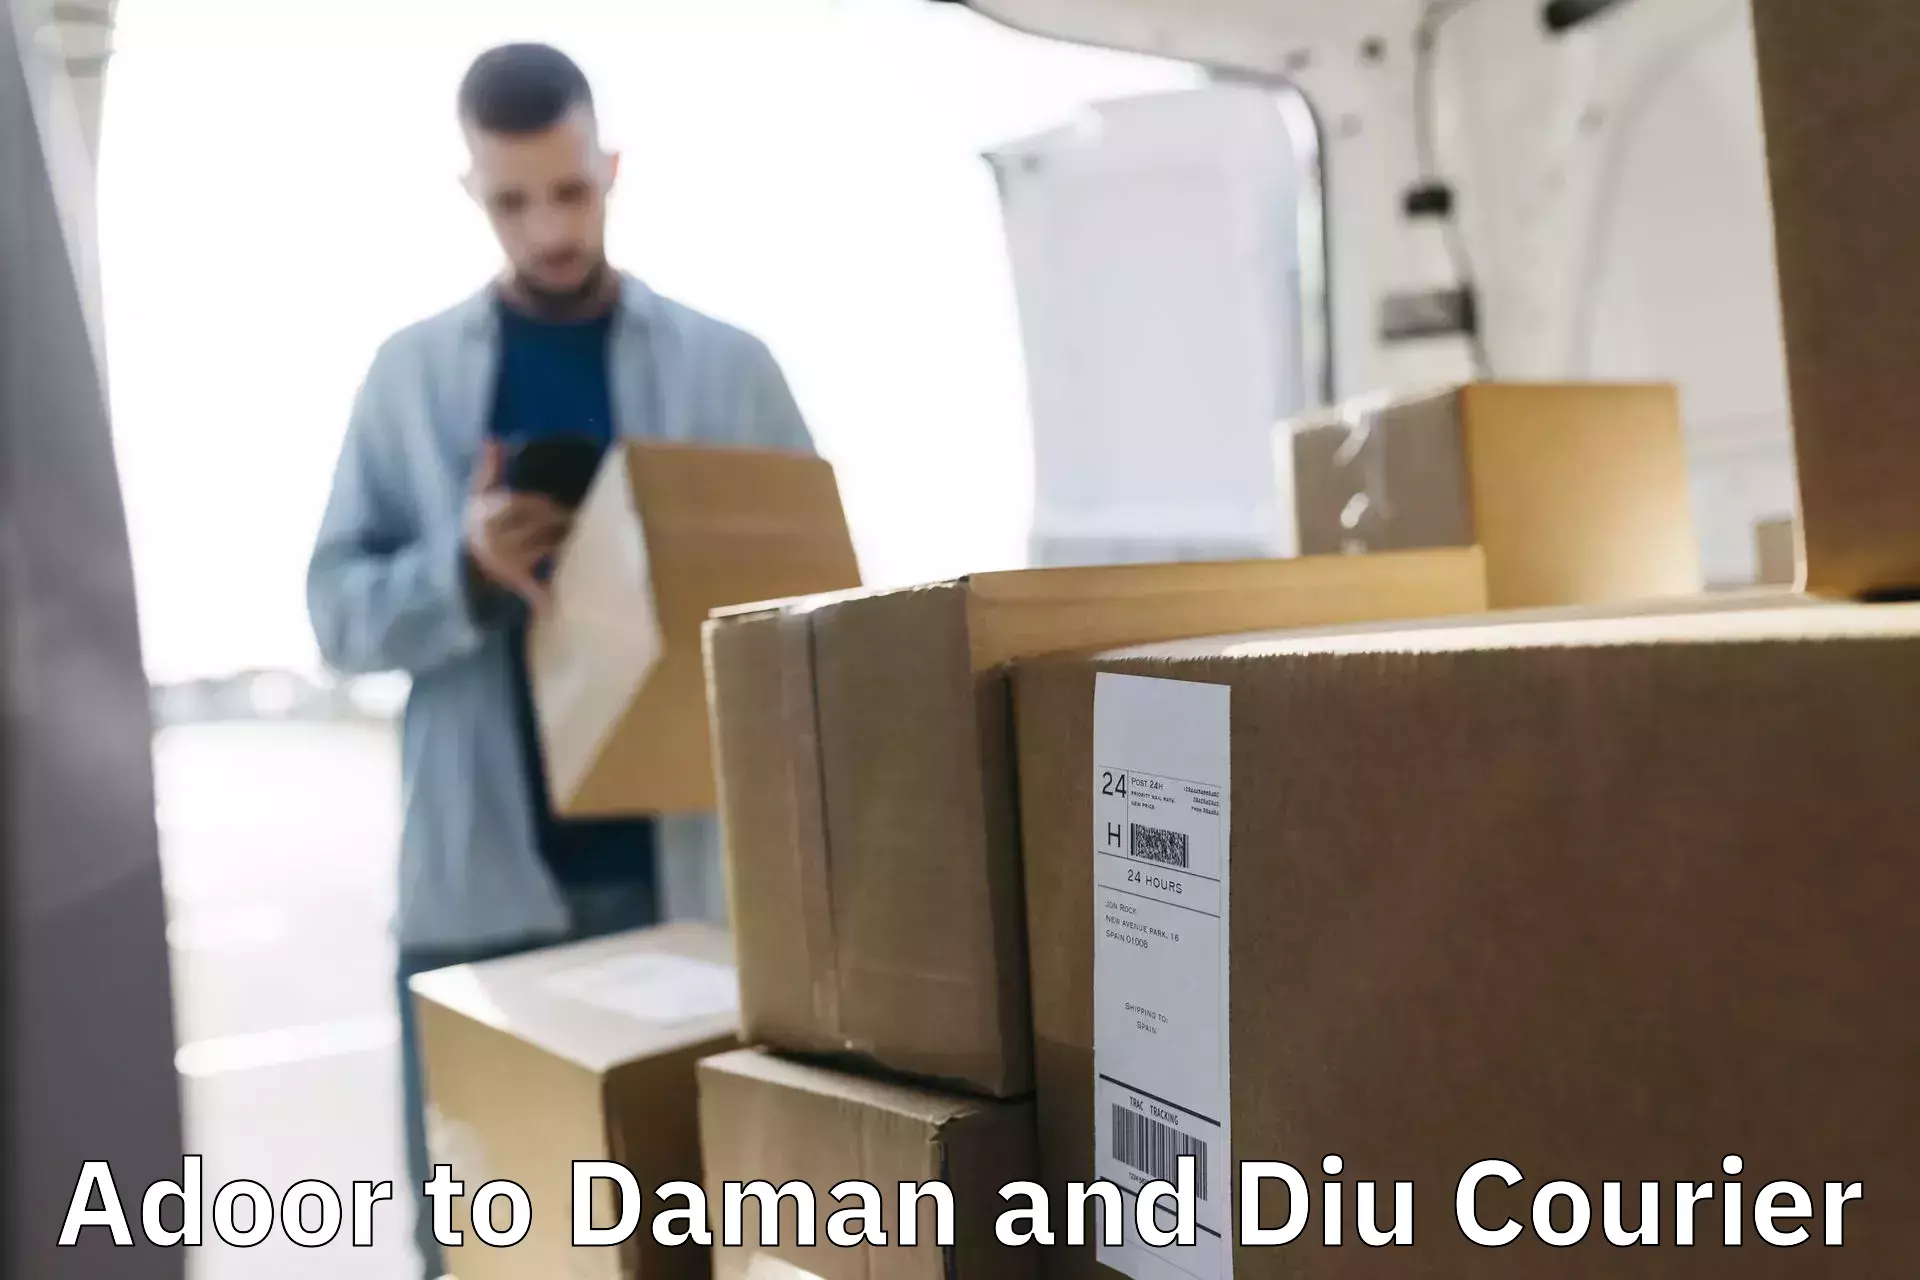 Parcel handling and care Adoor to Daman